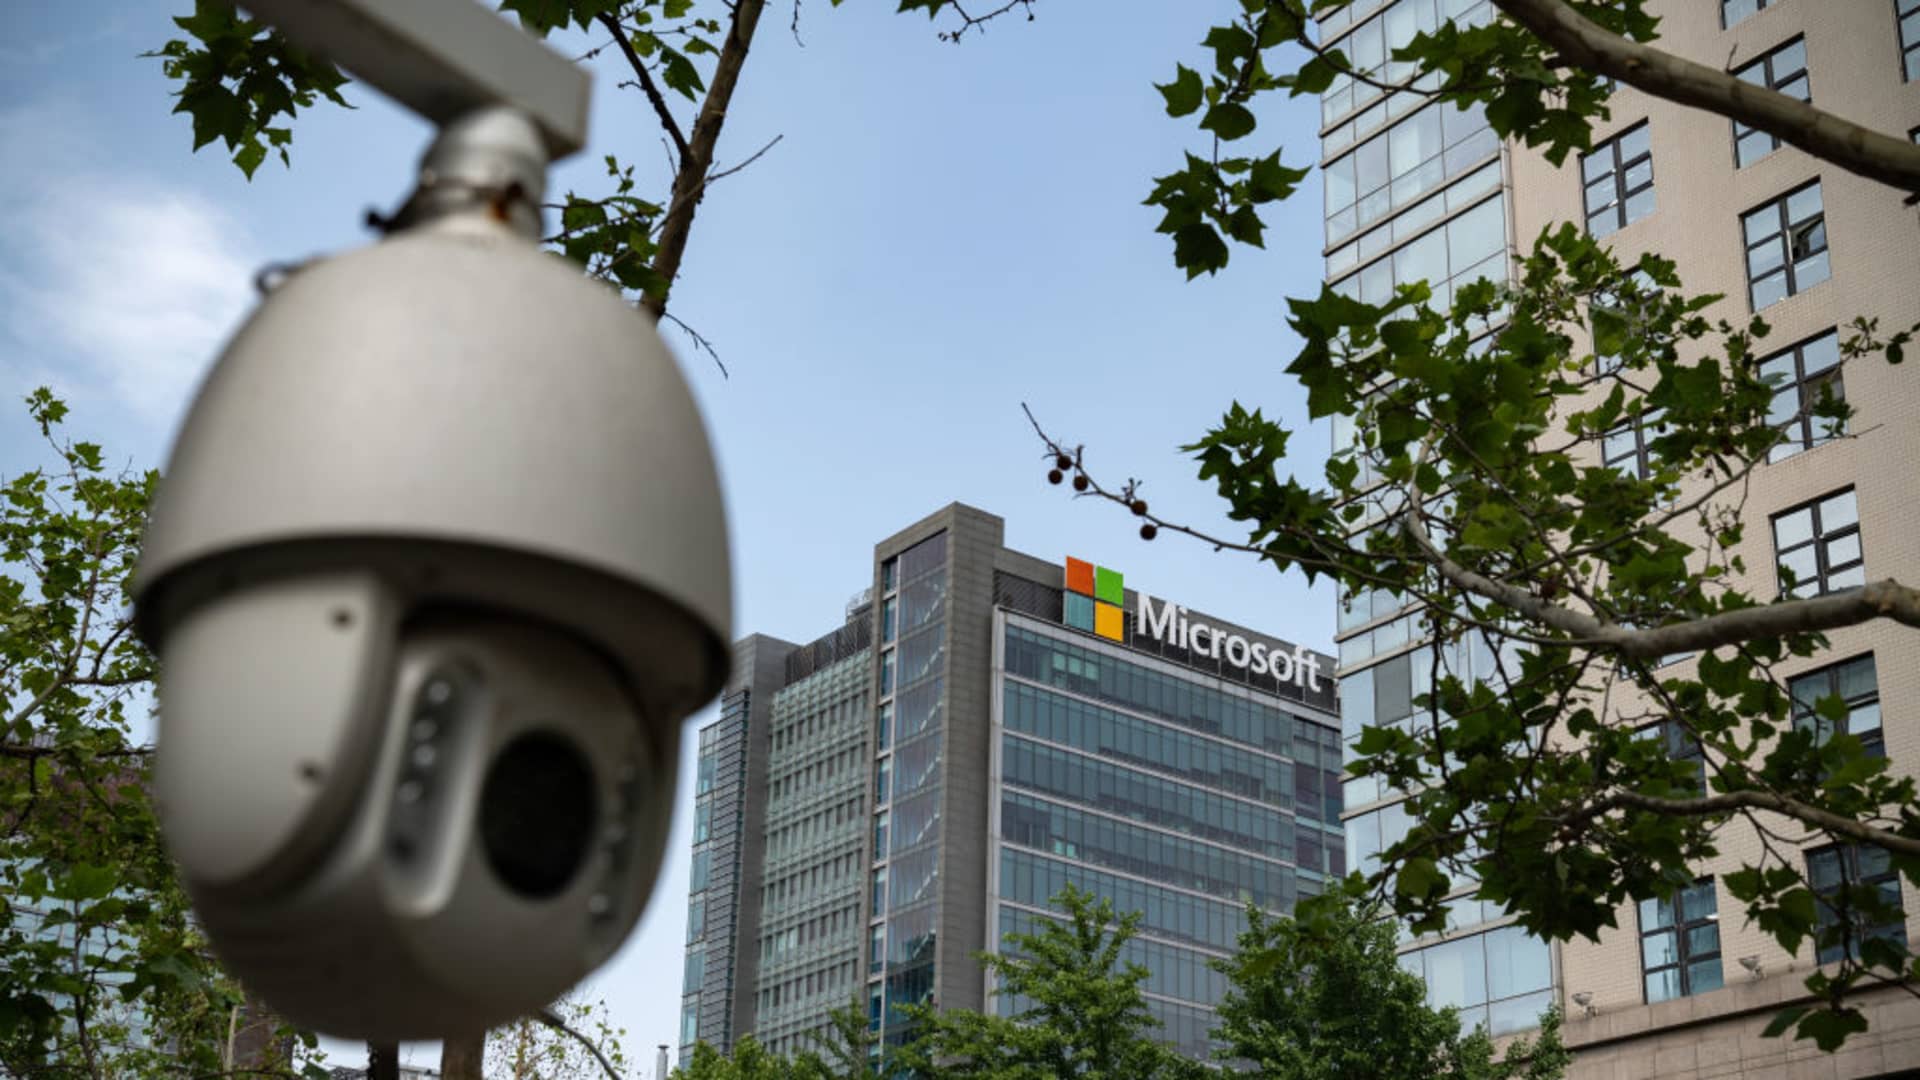 After a big hack, Microsoft is tying top executive pay to cyberthreats